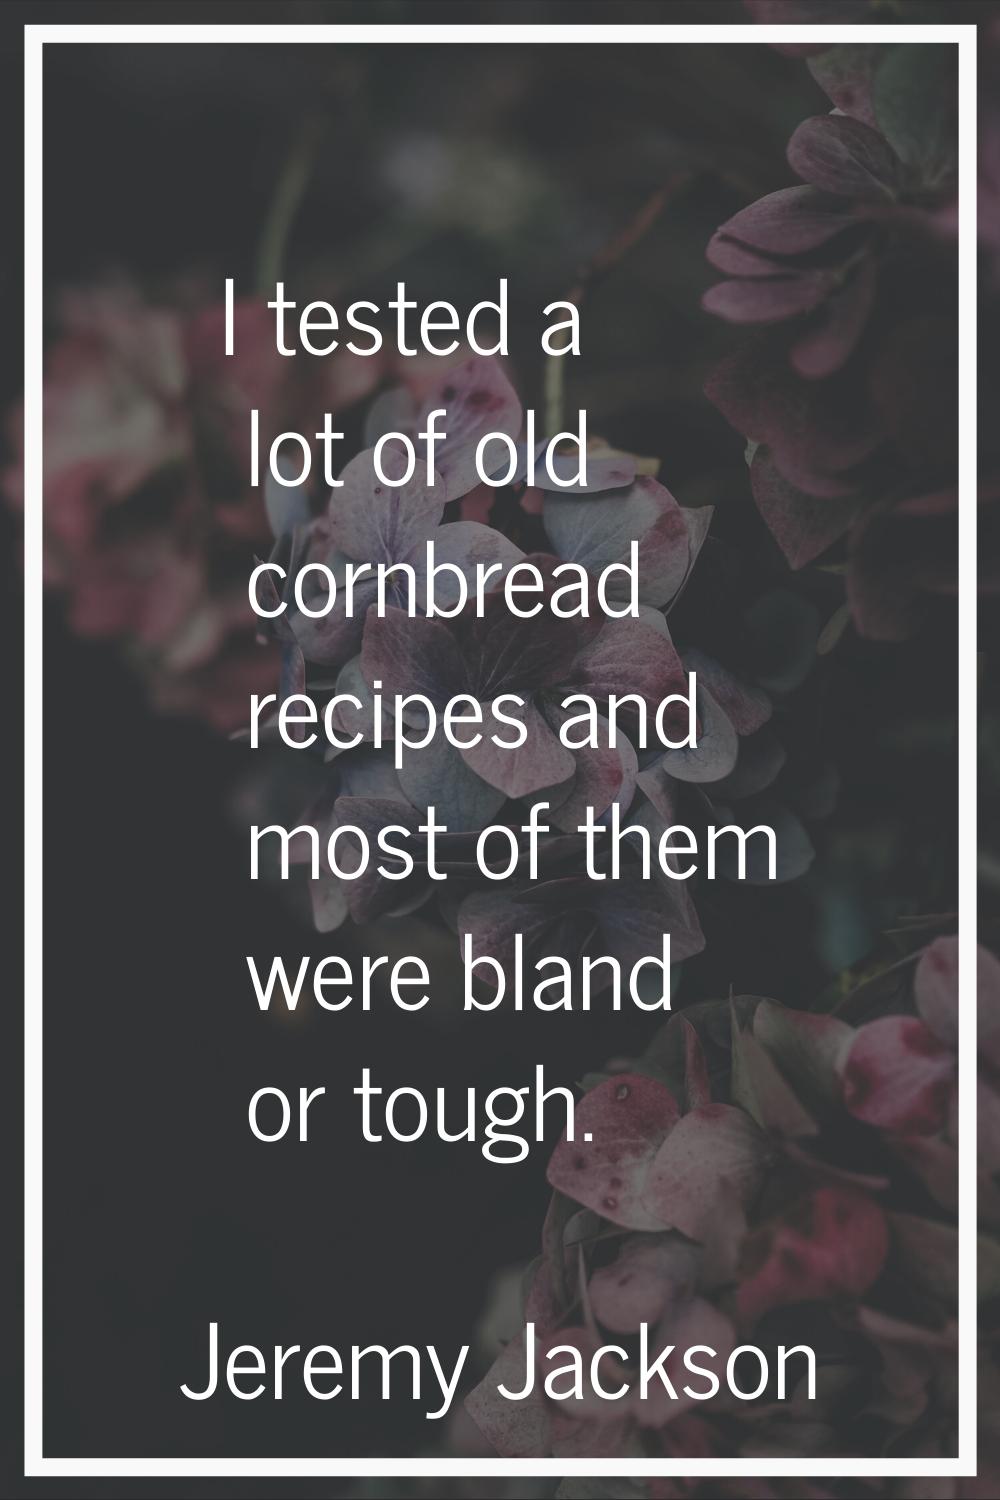 I tested a lot of old cornbread recipes and most of them were bland or tough.